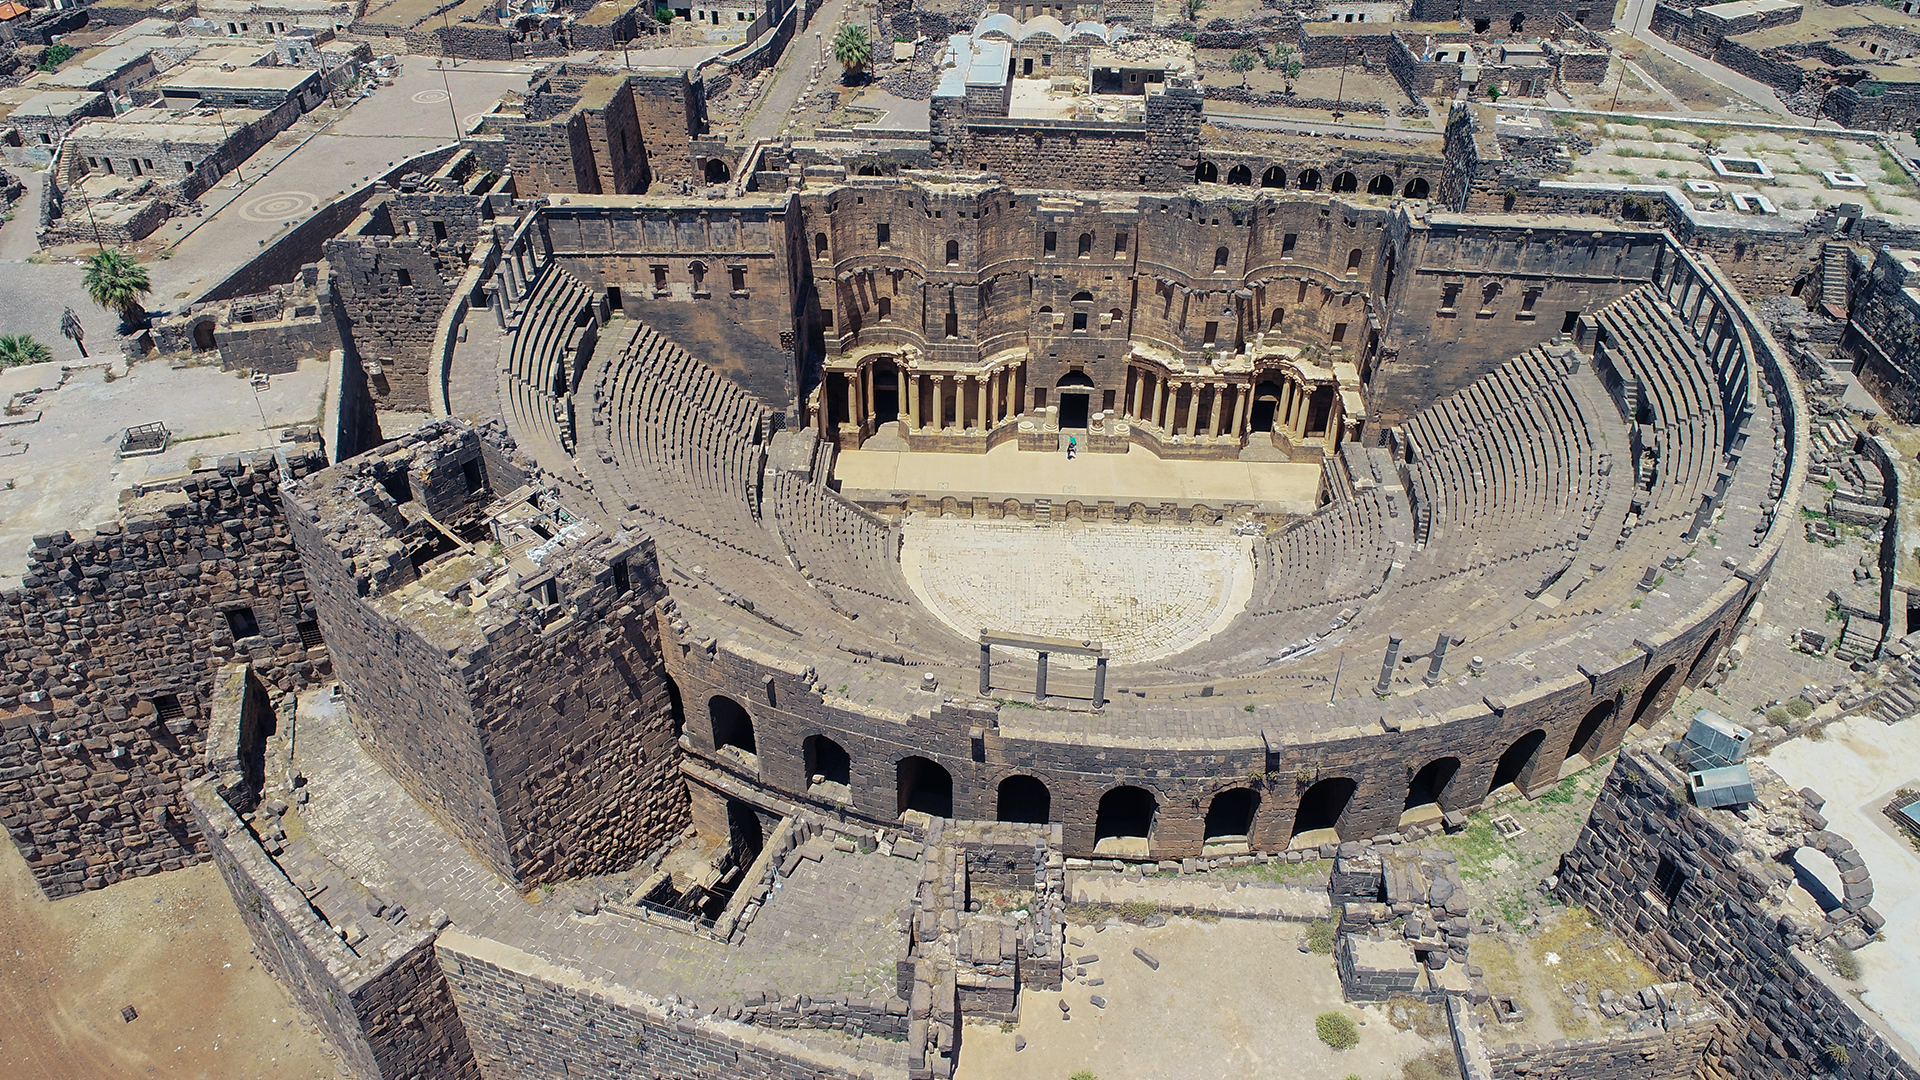 An aerial photograph skillfully captures the awe-inspiring sight of the renowned and exceptionally well-preserved Roman theatre of Bosra.